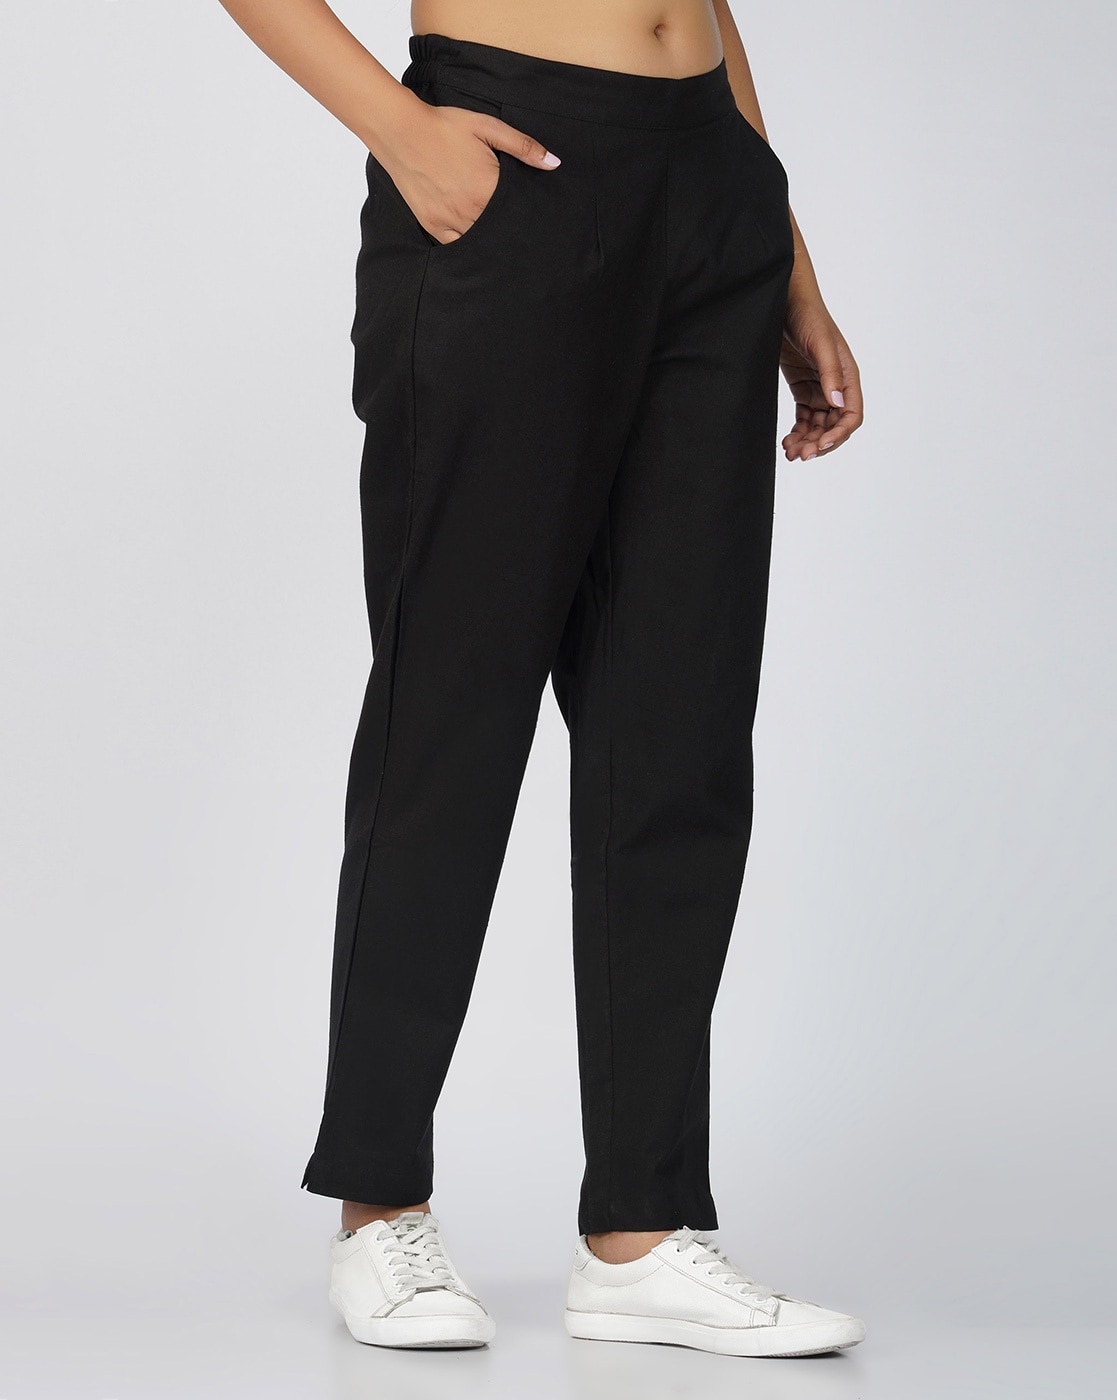 Buy Black Trousers & Pants for Women by SPARSA Online